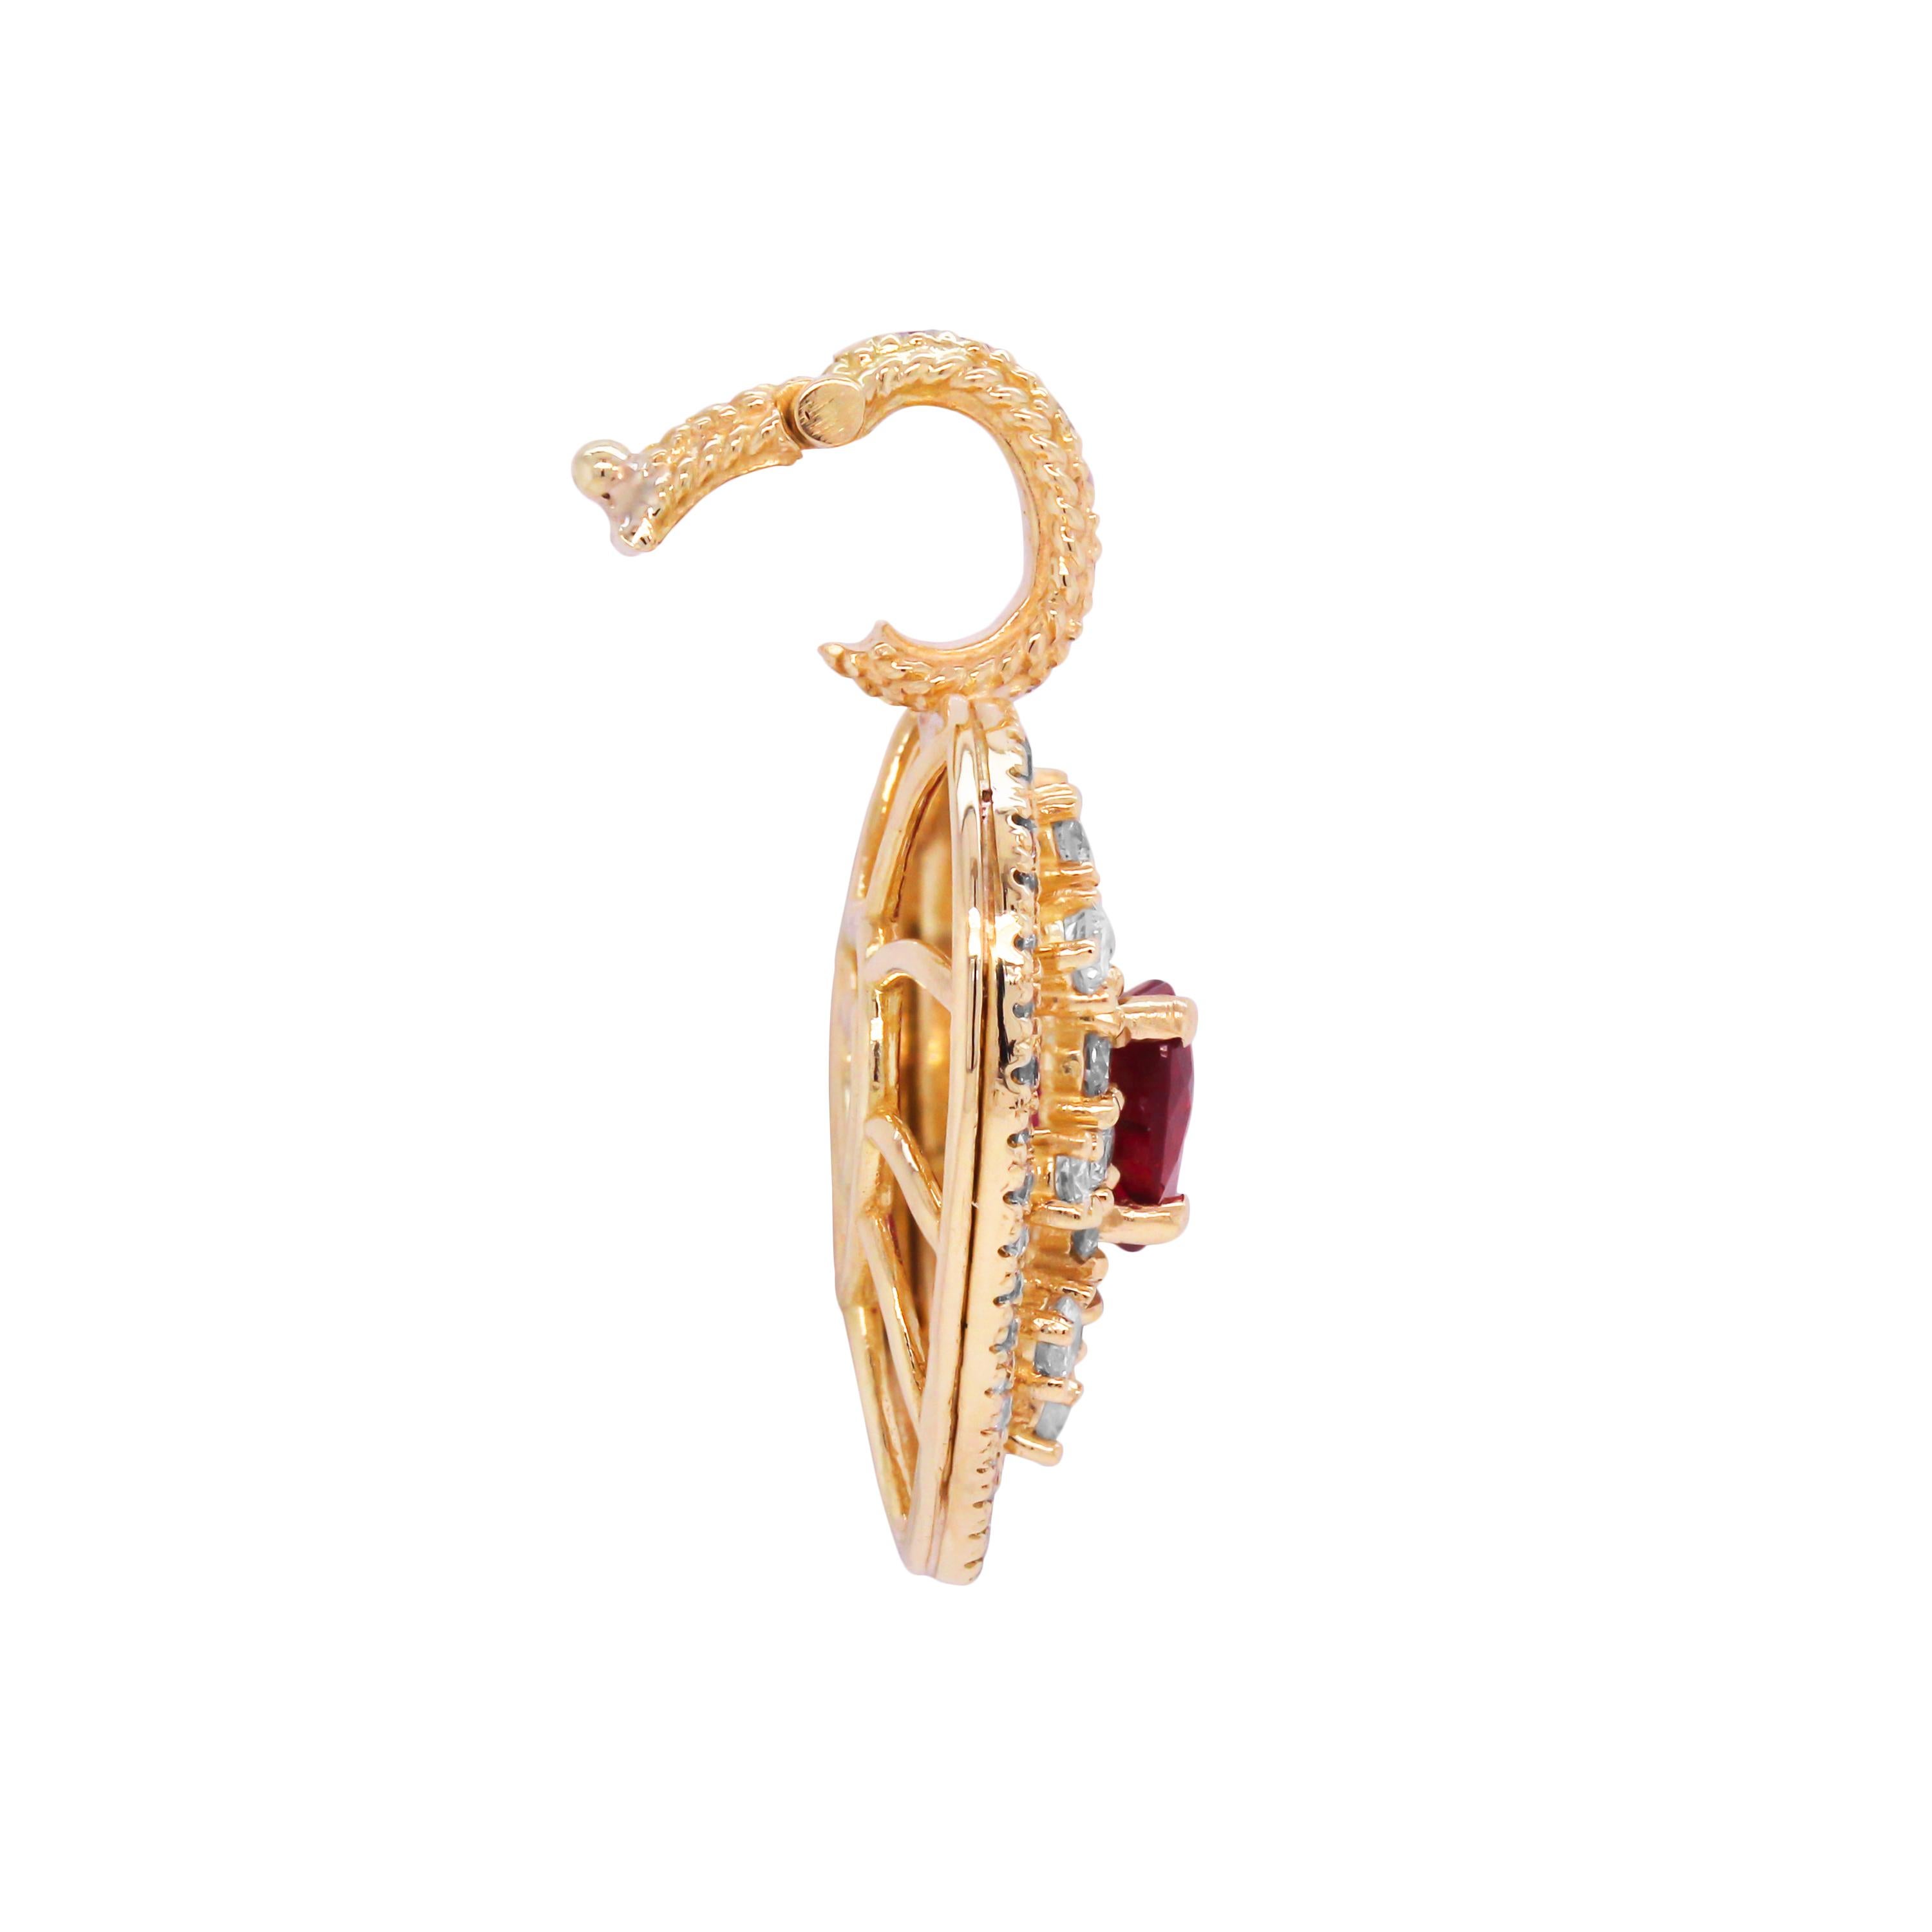 18K Yellow Gold and Diamond Heart Pendant with GIA Certified 2.01 Carat Heart Shape Ruby center

This incredible heart pendant features a Heart Shape Ruby center surrounded with diamonds all done in yellow gold

This enhancer pendant clips on and